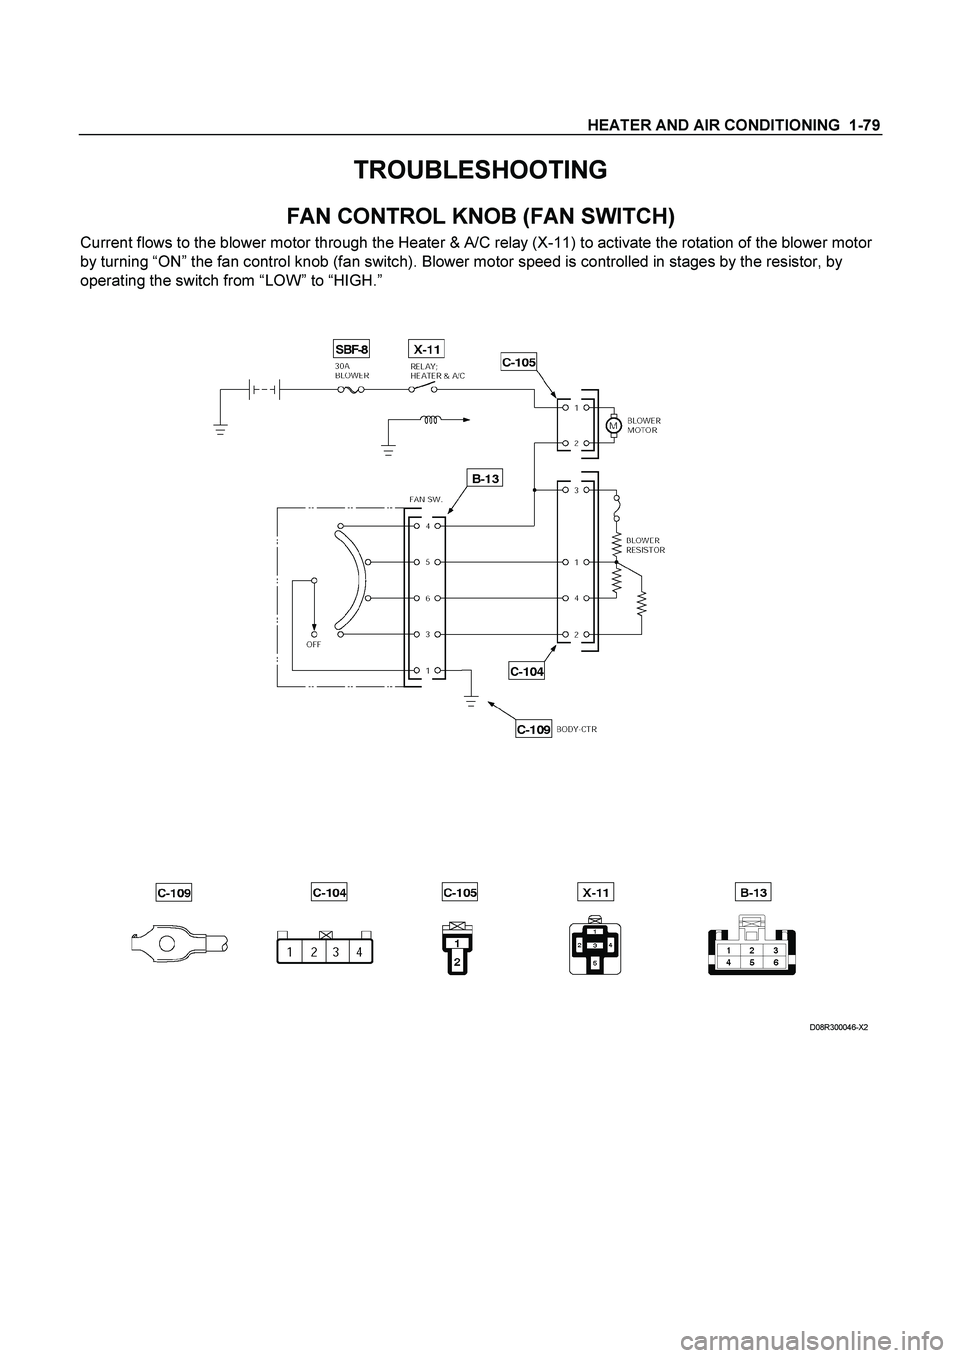 ISUZU TF SERIES 2004  Workshop Manual HEATER AND AIR CONDITIONING  1-79
 
TROUBLESHOOTING 
FAN CONTROL KNOB (FAN SWITCH) 
Current flows to the blower motor through the Heater & A/C relay (X-11) to activate the rotation of the blower motor